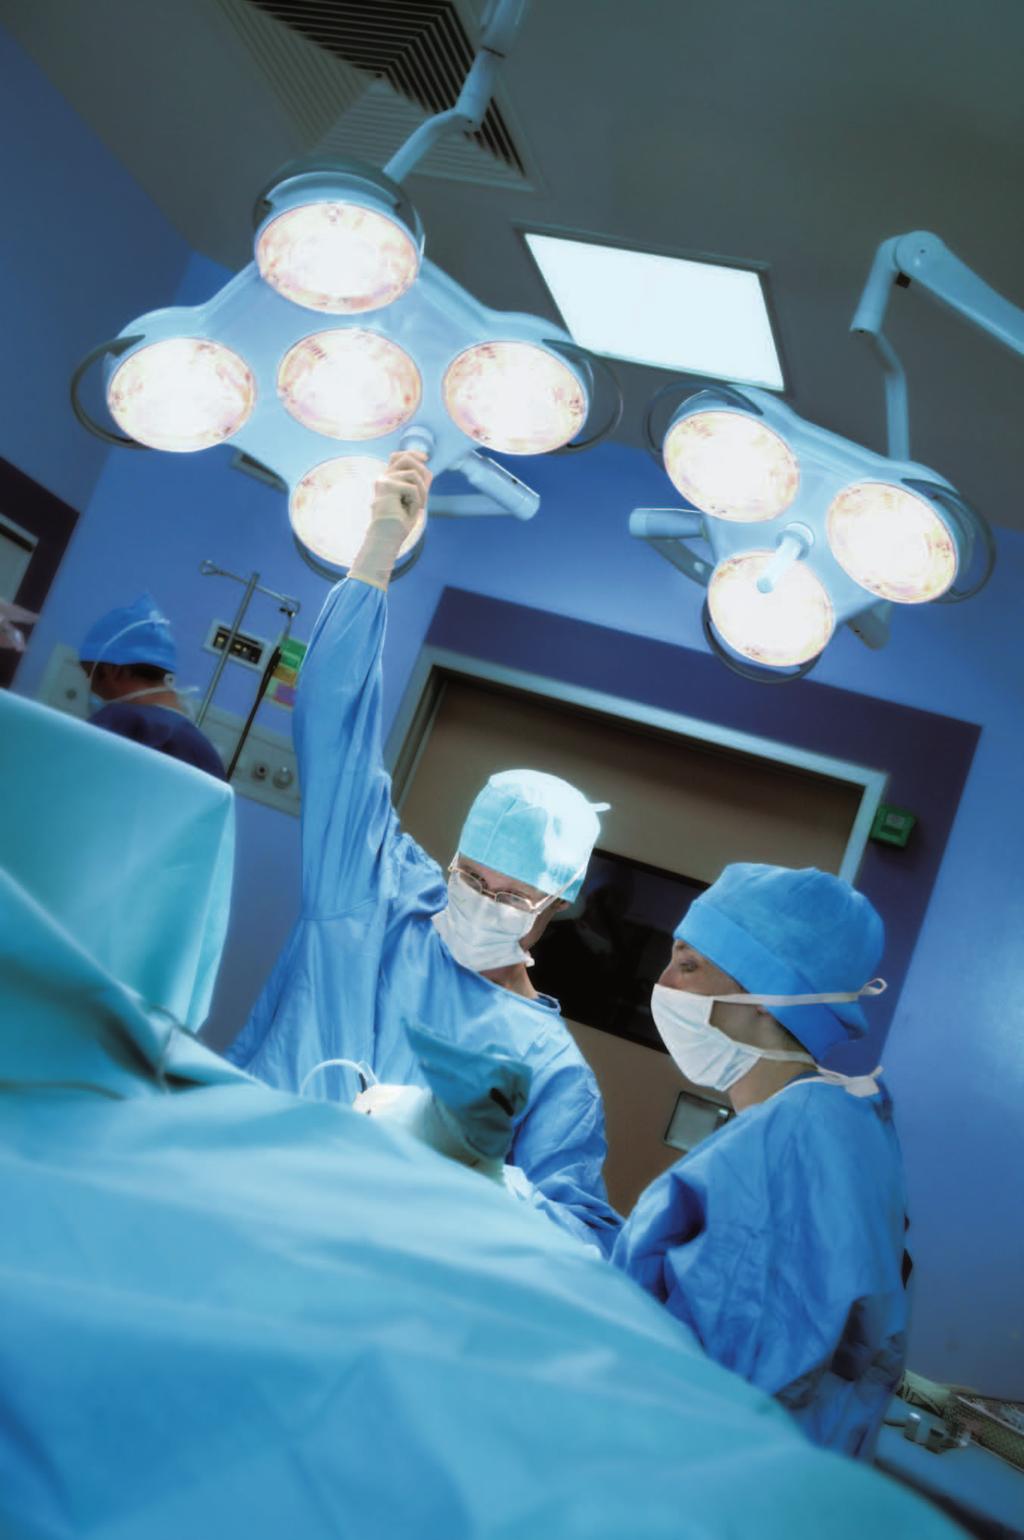 Whether Surgical Workplaces, Cardio Vascular or Critical Care, MAQUET always puts the needs of staff and patients in the foreground during product development work.